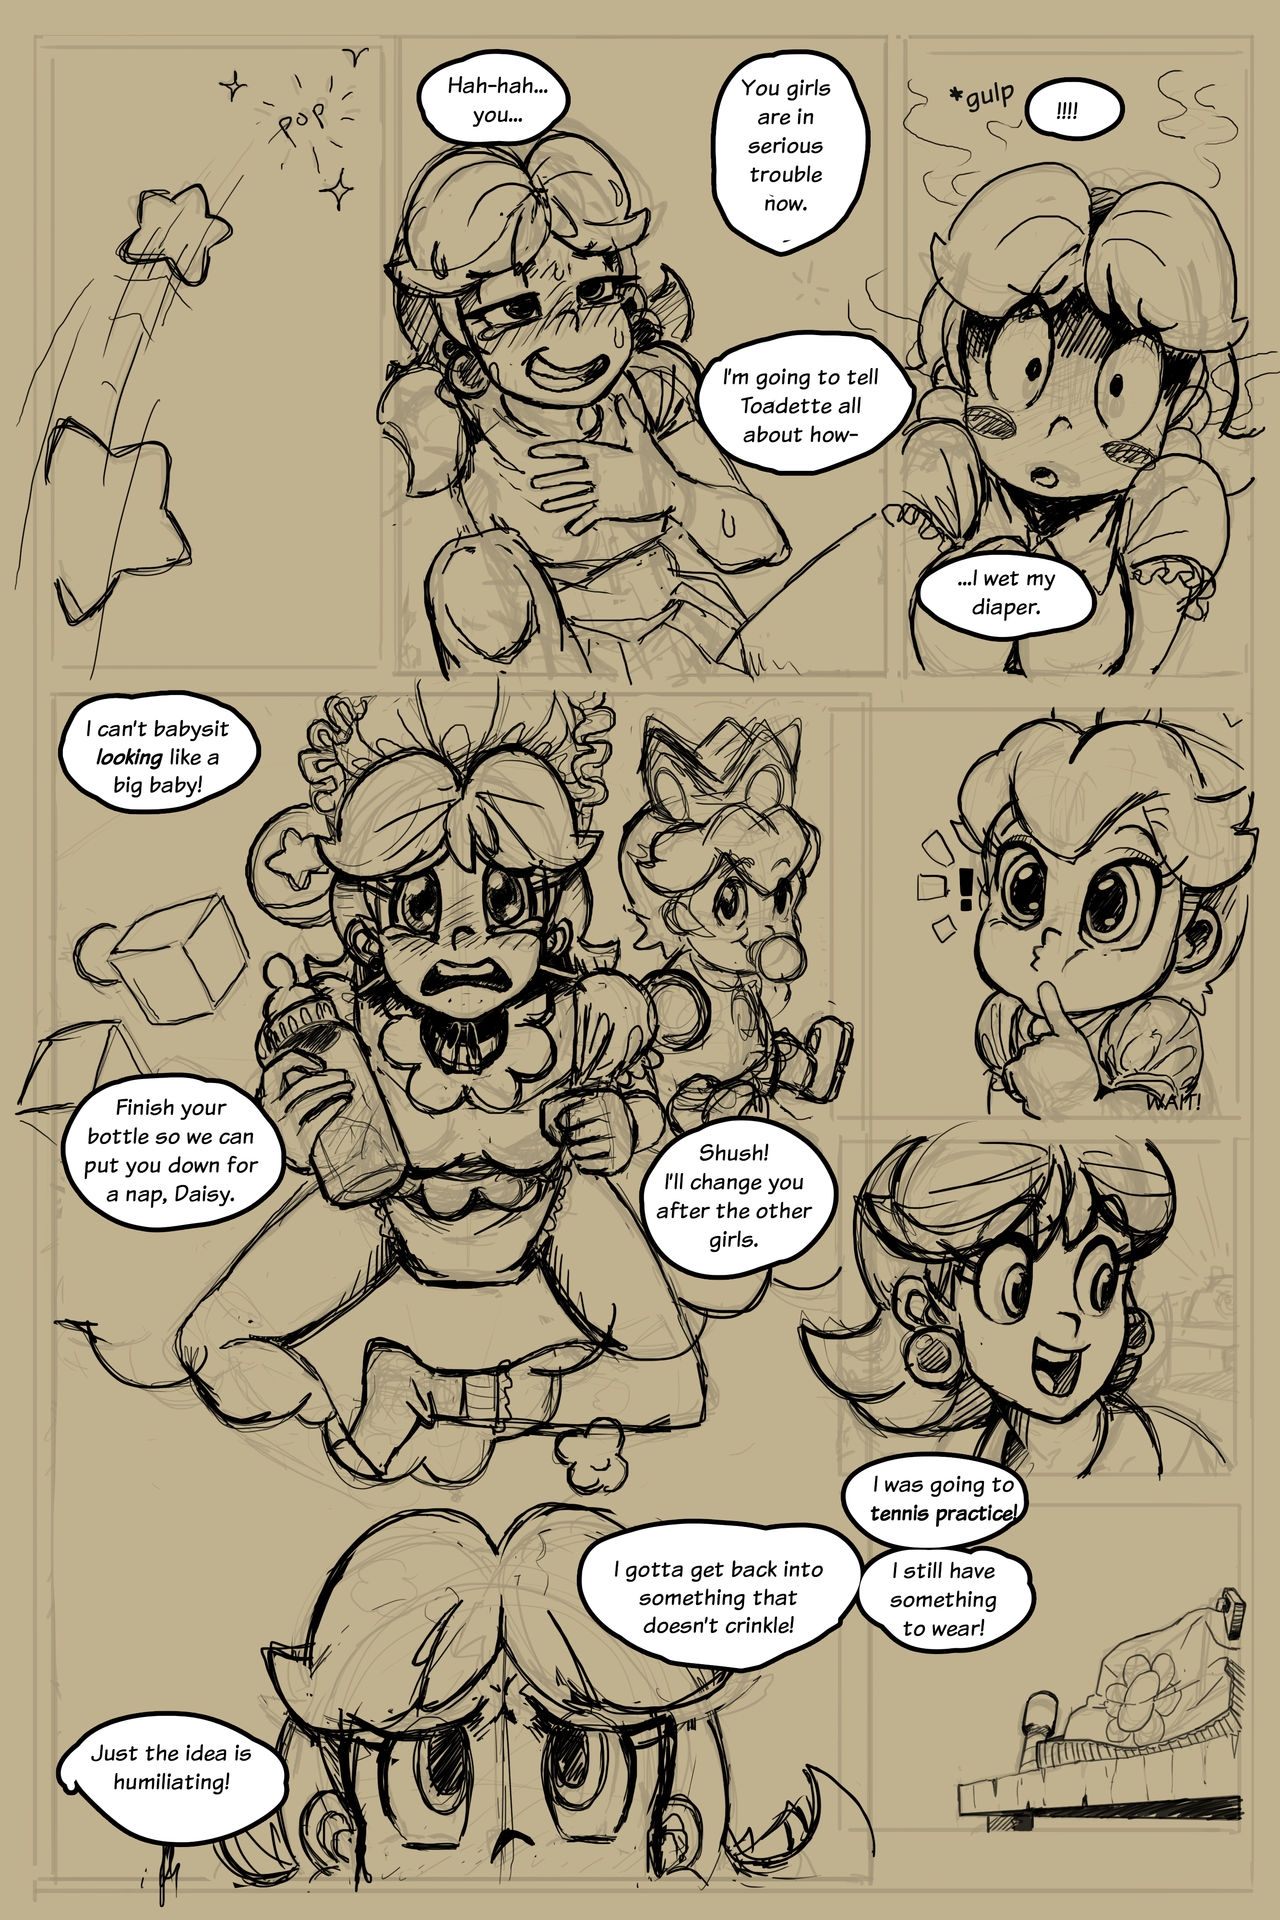 [Pizzabagel] Daisy's Day (Sketch) 5